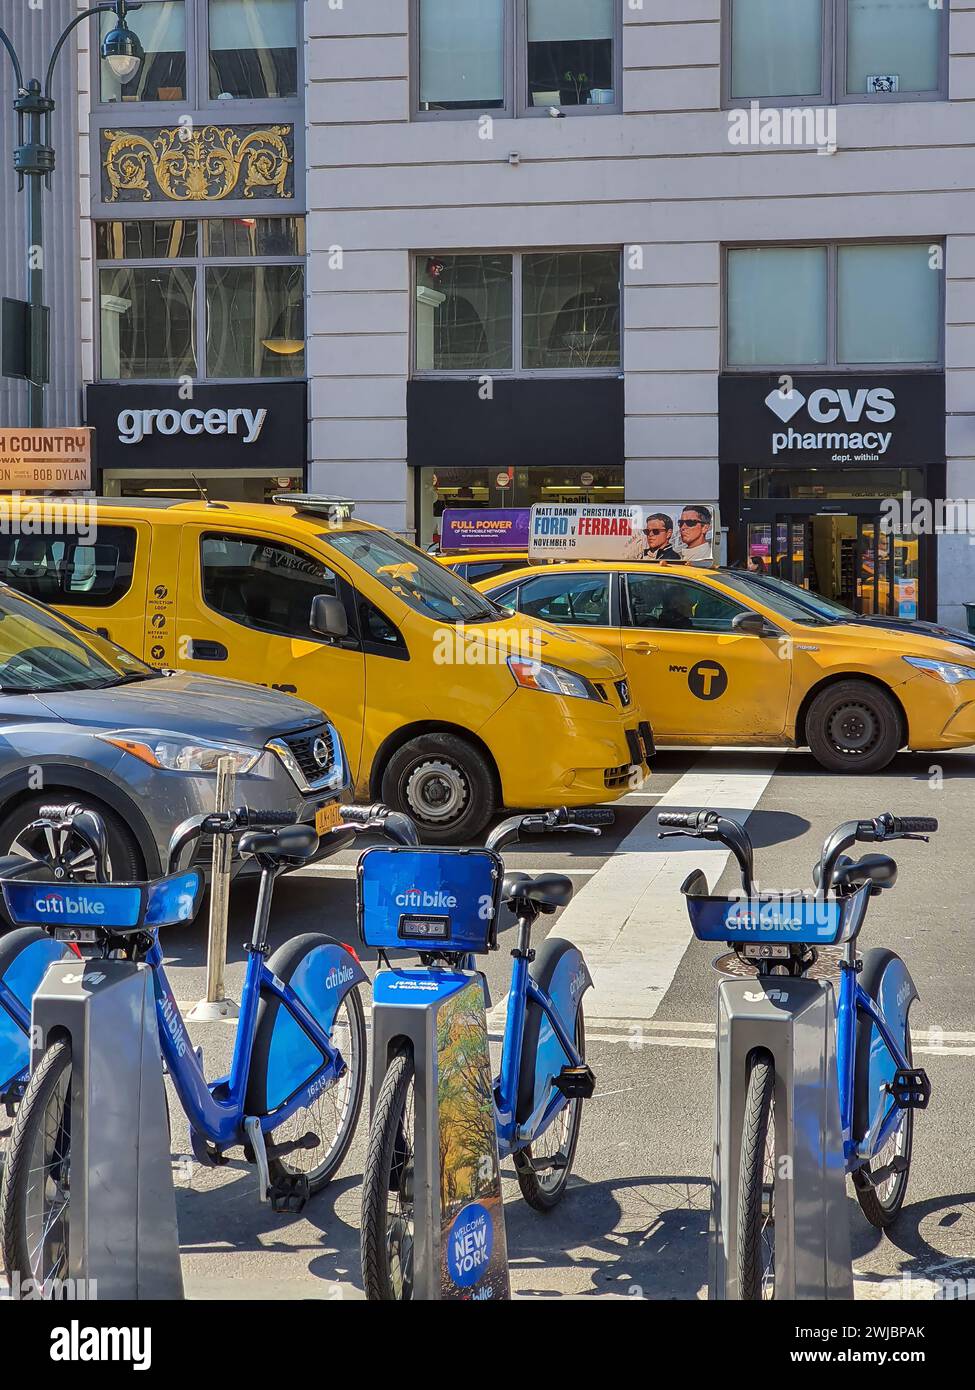 NEW YORK, USA - MARCH 8, 2020: Yellow taxis and bicycles together, traditional local transportation symbols, on a Manhattan street. Stock Photo